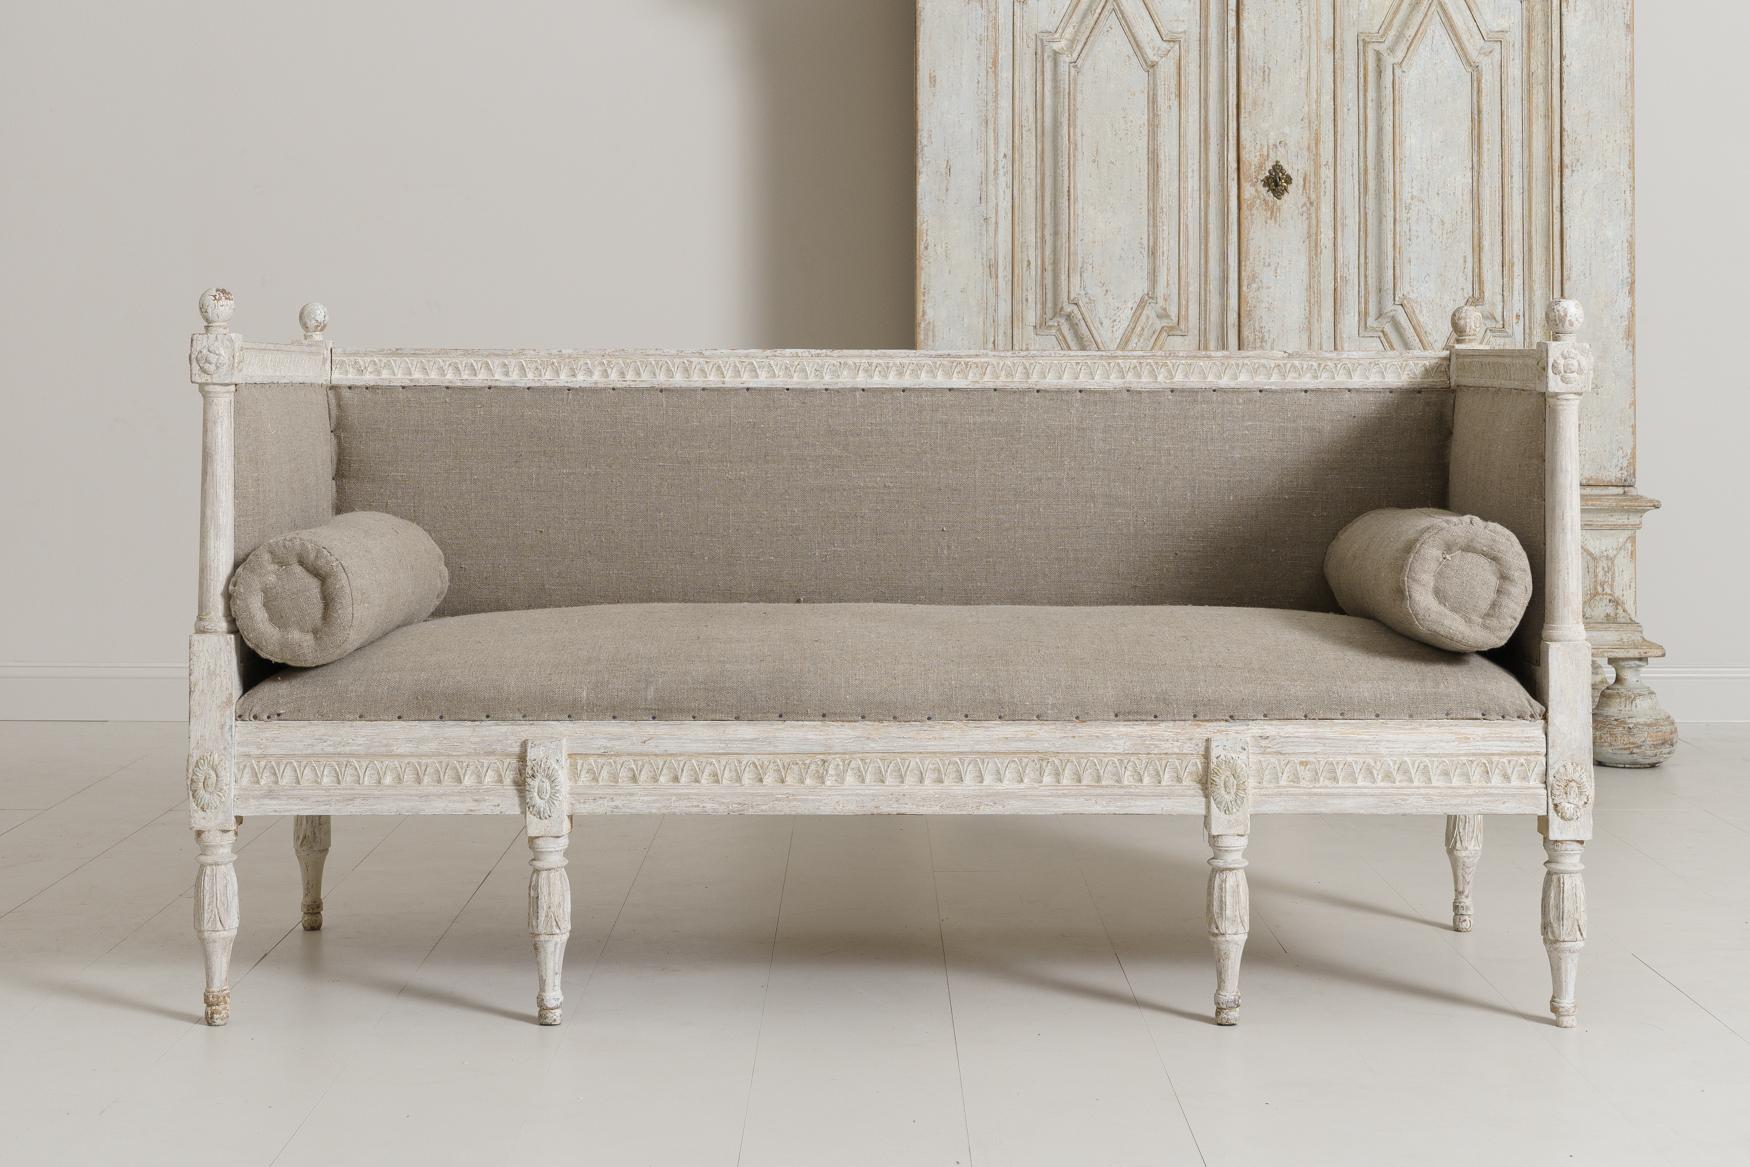 A beautifully carved Swedish sofa bench from the Gustavian period, hand-scraped to reveal the original paint surface and newly upholstered in linen with side bolster pillows, circa 1800. The back and seat frame feature carved lamb's tongue detail